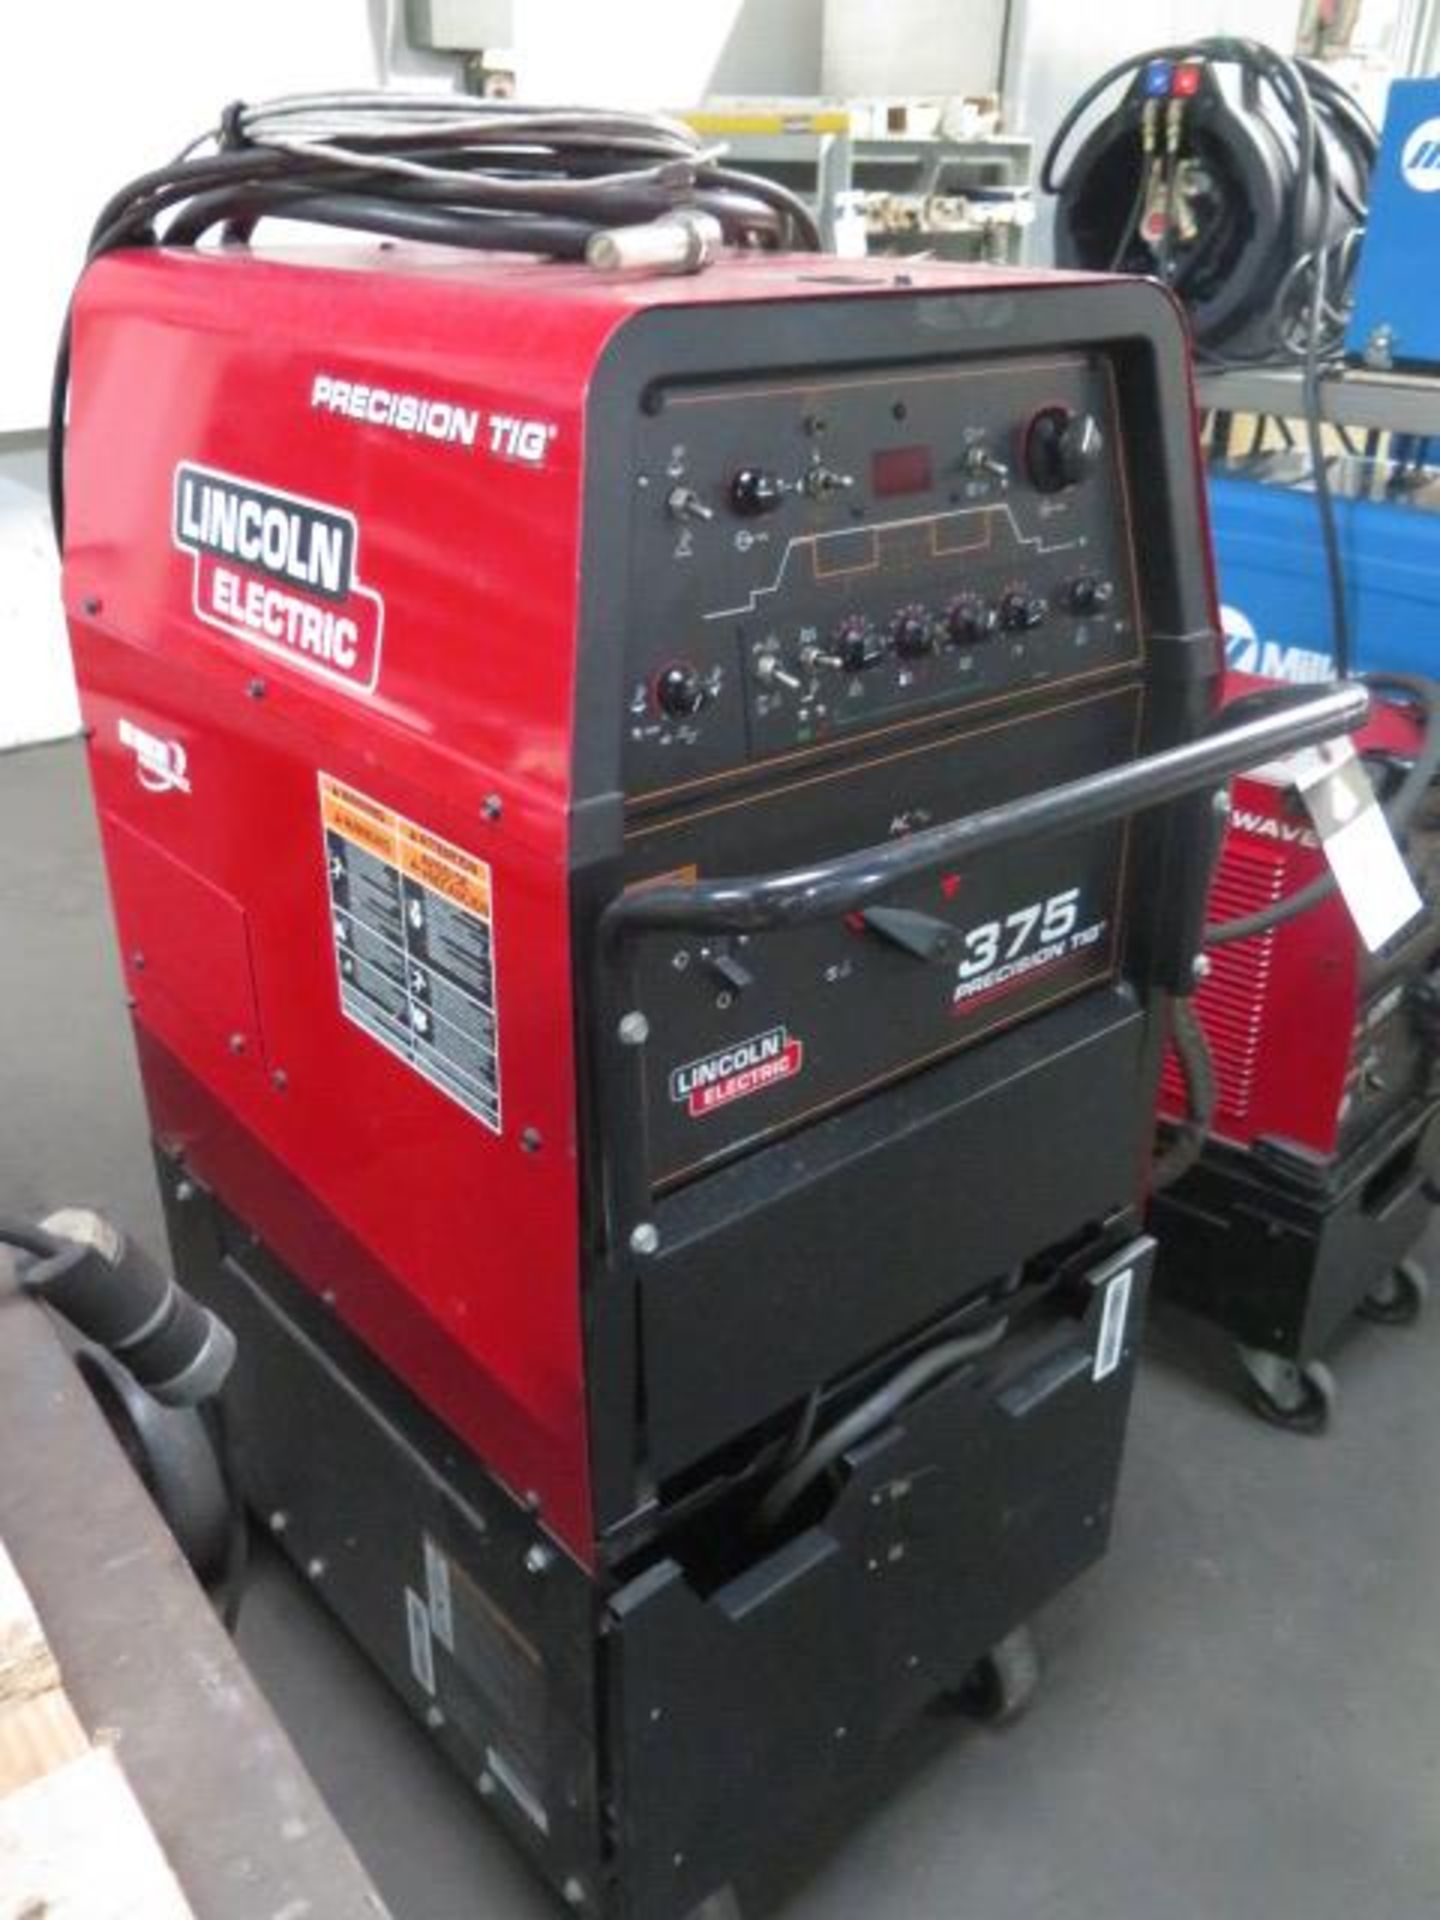 Lincoln Precision TIG 375 TIG Welding Power Source s/n U1131208373 (SOLD AS-IS - NO WARRANTY) - Image 3 of 11